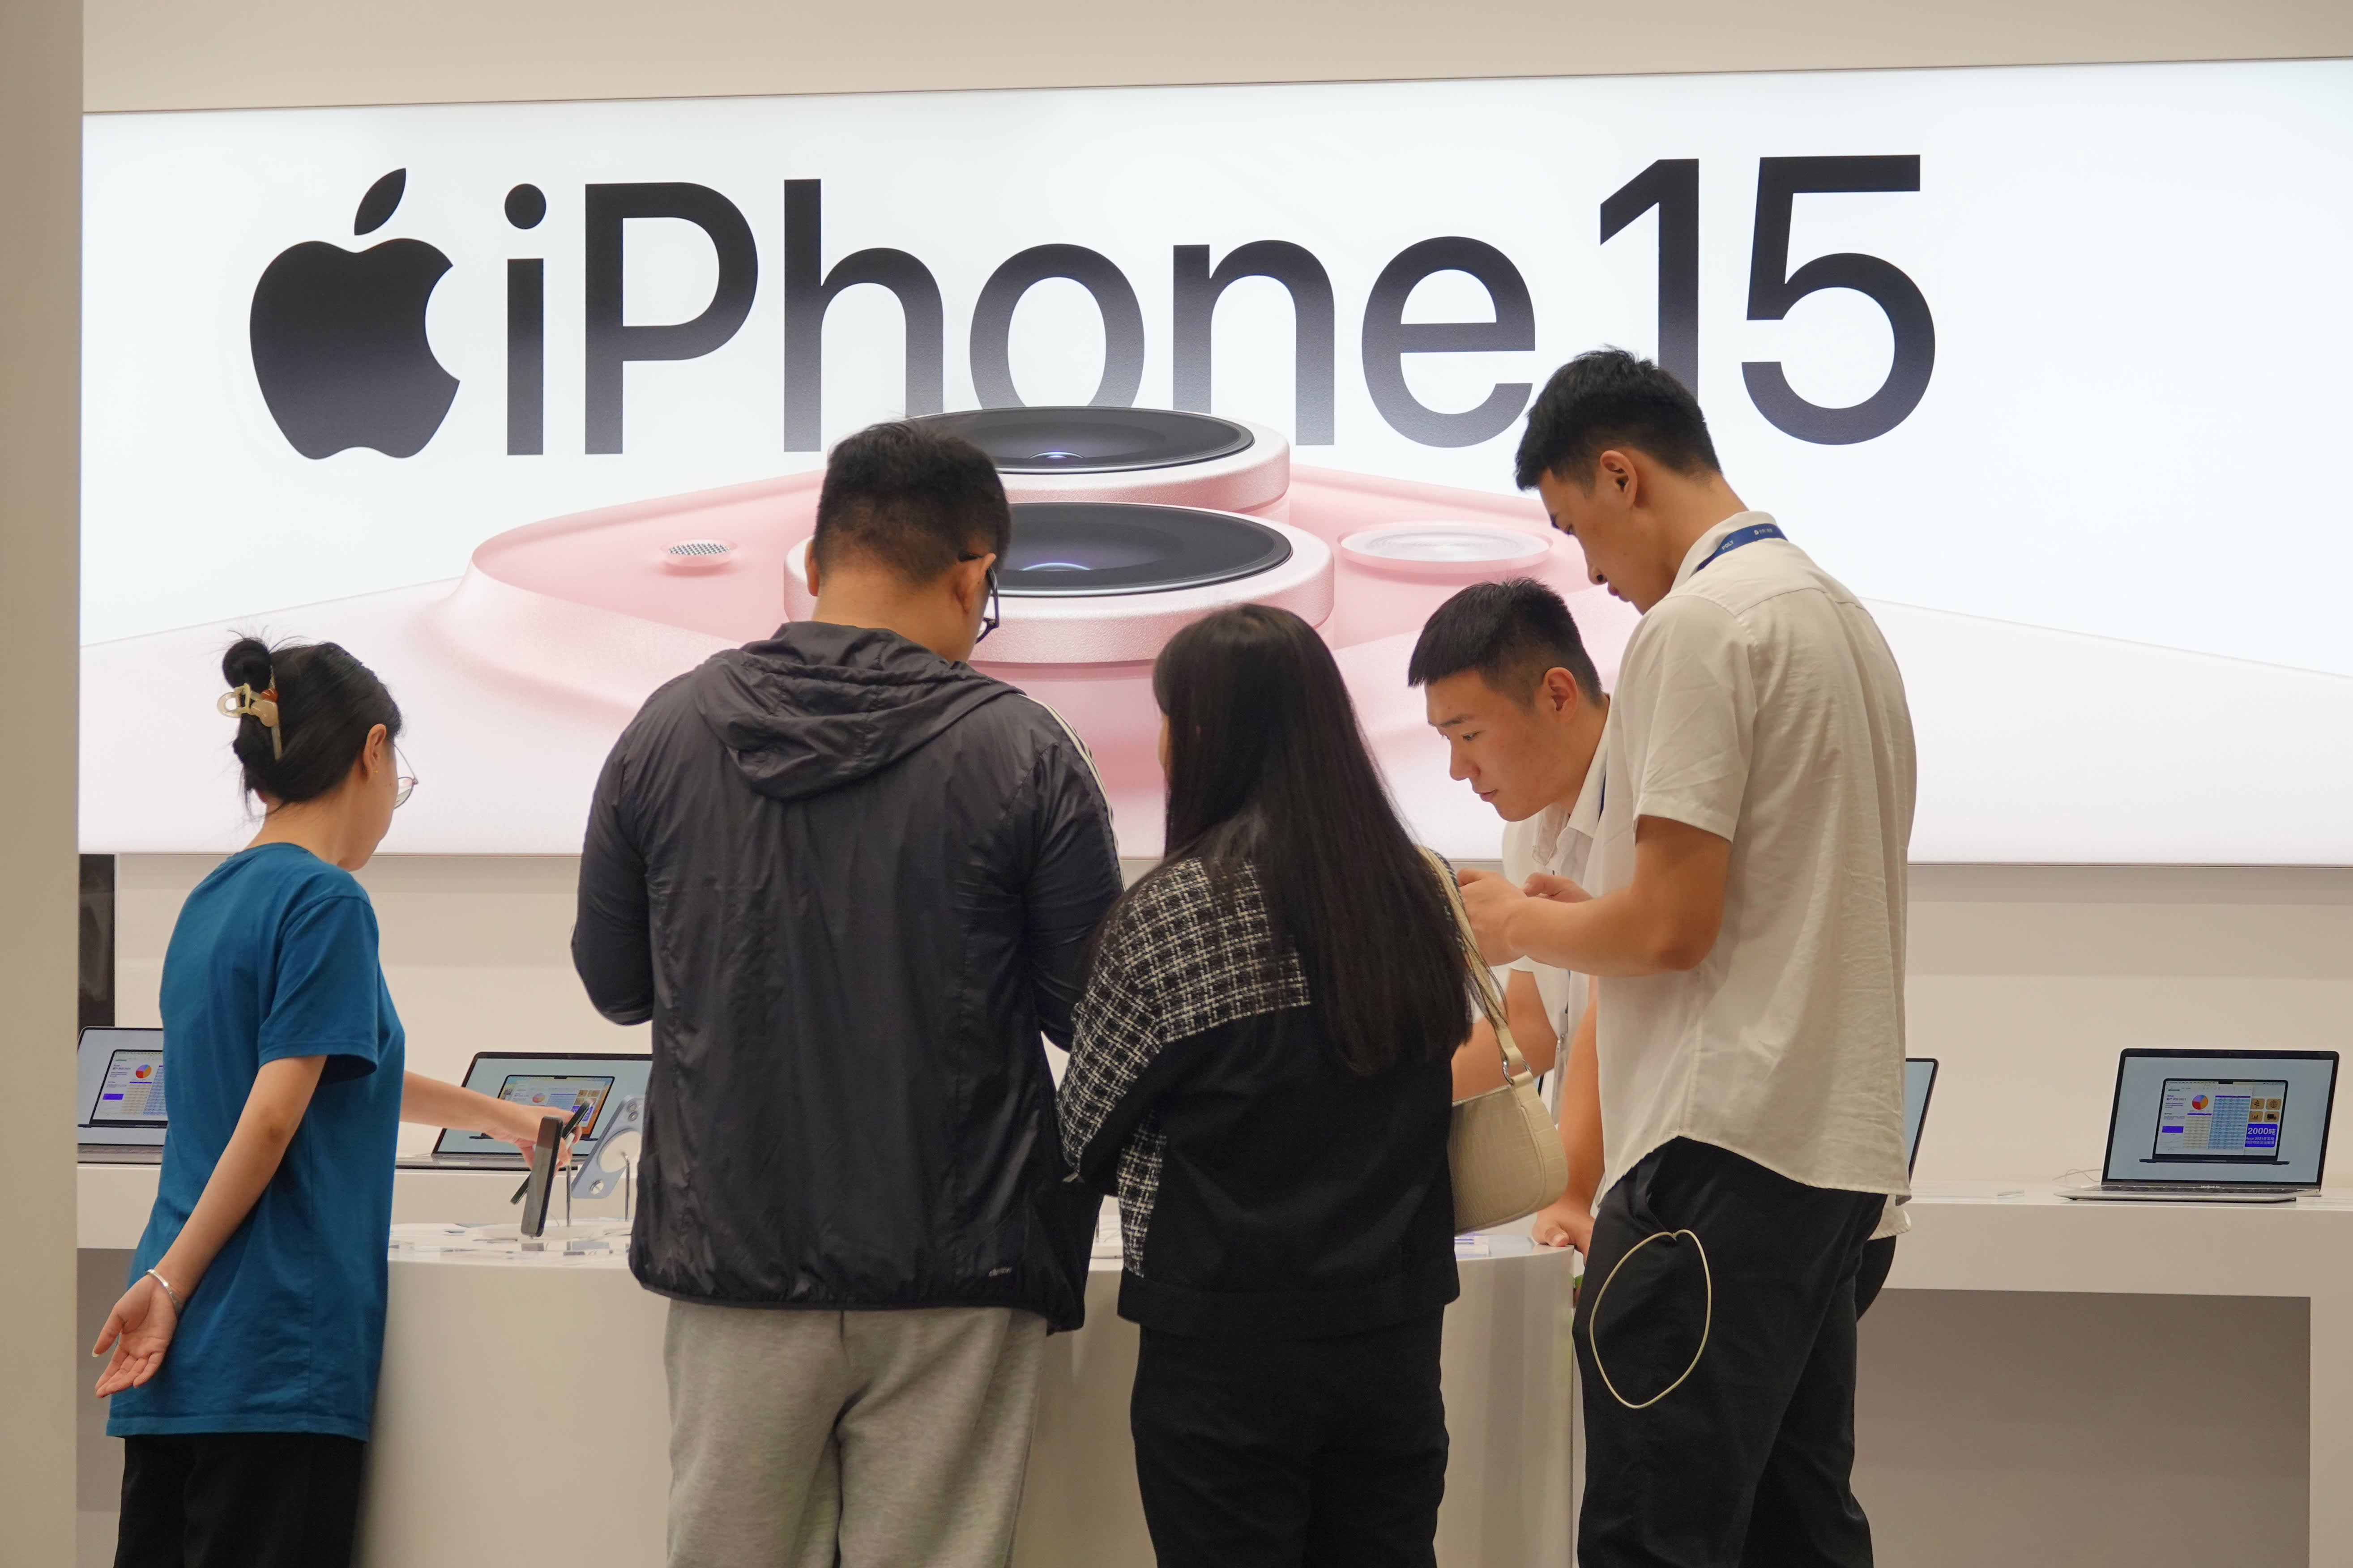 Apple Apple iphone profits plunge 24% in China as Huawei resurges, report says